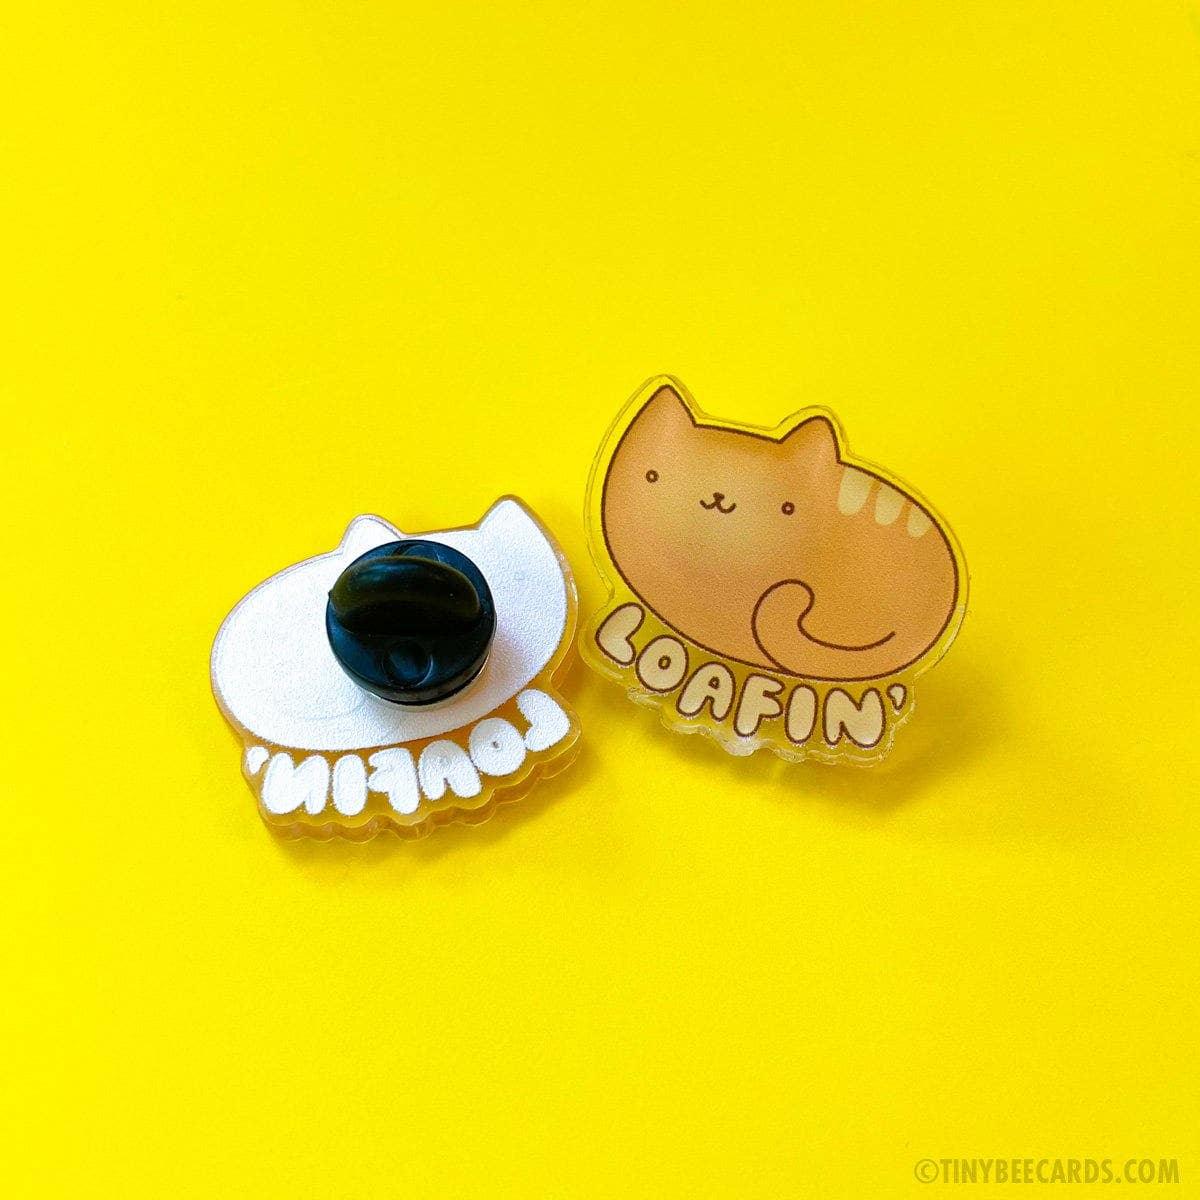 Bread Loaf Cat - Acrylic Pin - Tiny Bee Cards - The Sock Monster